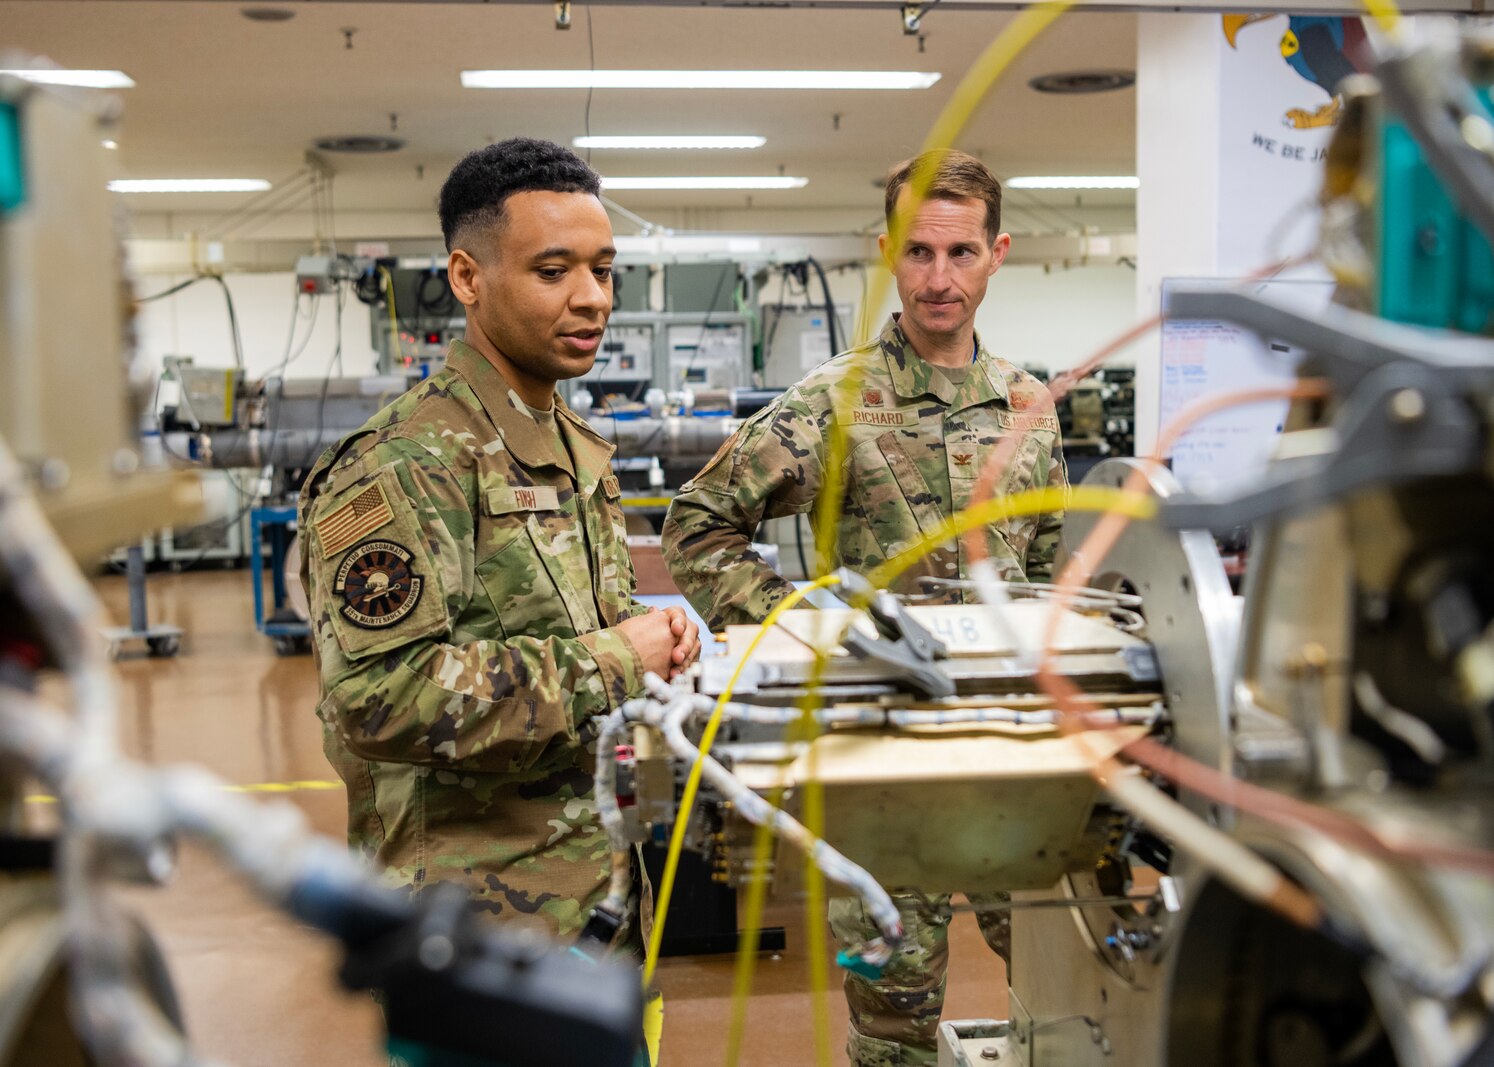 U.S. Air Force Staff Sgt. Lorenzo Finch, 35th Maintenance Squadron electronic warfare systems craftsman, explains aircraft systems to Col. Michael Richard, 35th Fighter Wing (FW) commander, and Command Chief Master Sgt. Cheronica Blandburg, 35th FW command chief, during a Wild Weasel Walk-through at Misawa Air Base, Japan, March 30, 2023. Electronic warfare systems specialists go through extensive training to be able to install and service radar, communications, weapons and other flight operations to ensure the safety of the aircraft and the crew and the successful completion of missions. (U.S. Air Force photo by Tech. Sgt. Jao’Torey Johnson)